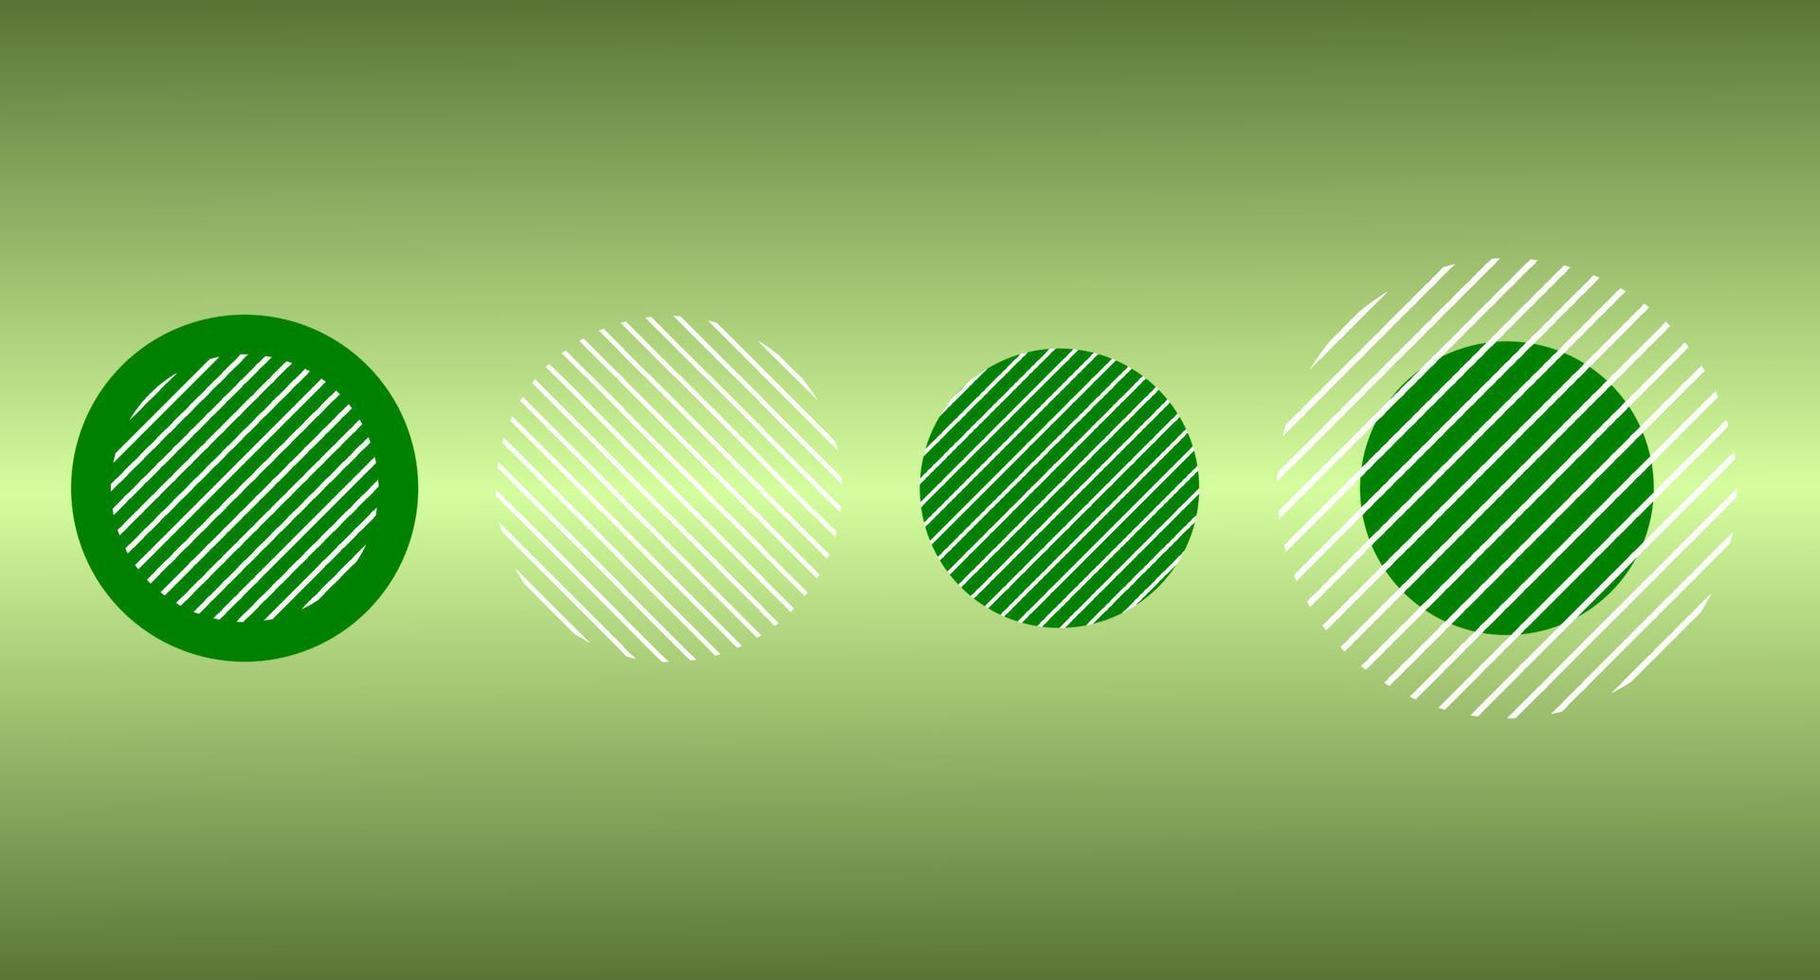 green circle graphic element for website and graphic design, vector illustration abstract object geometry